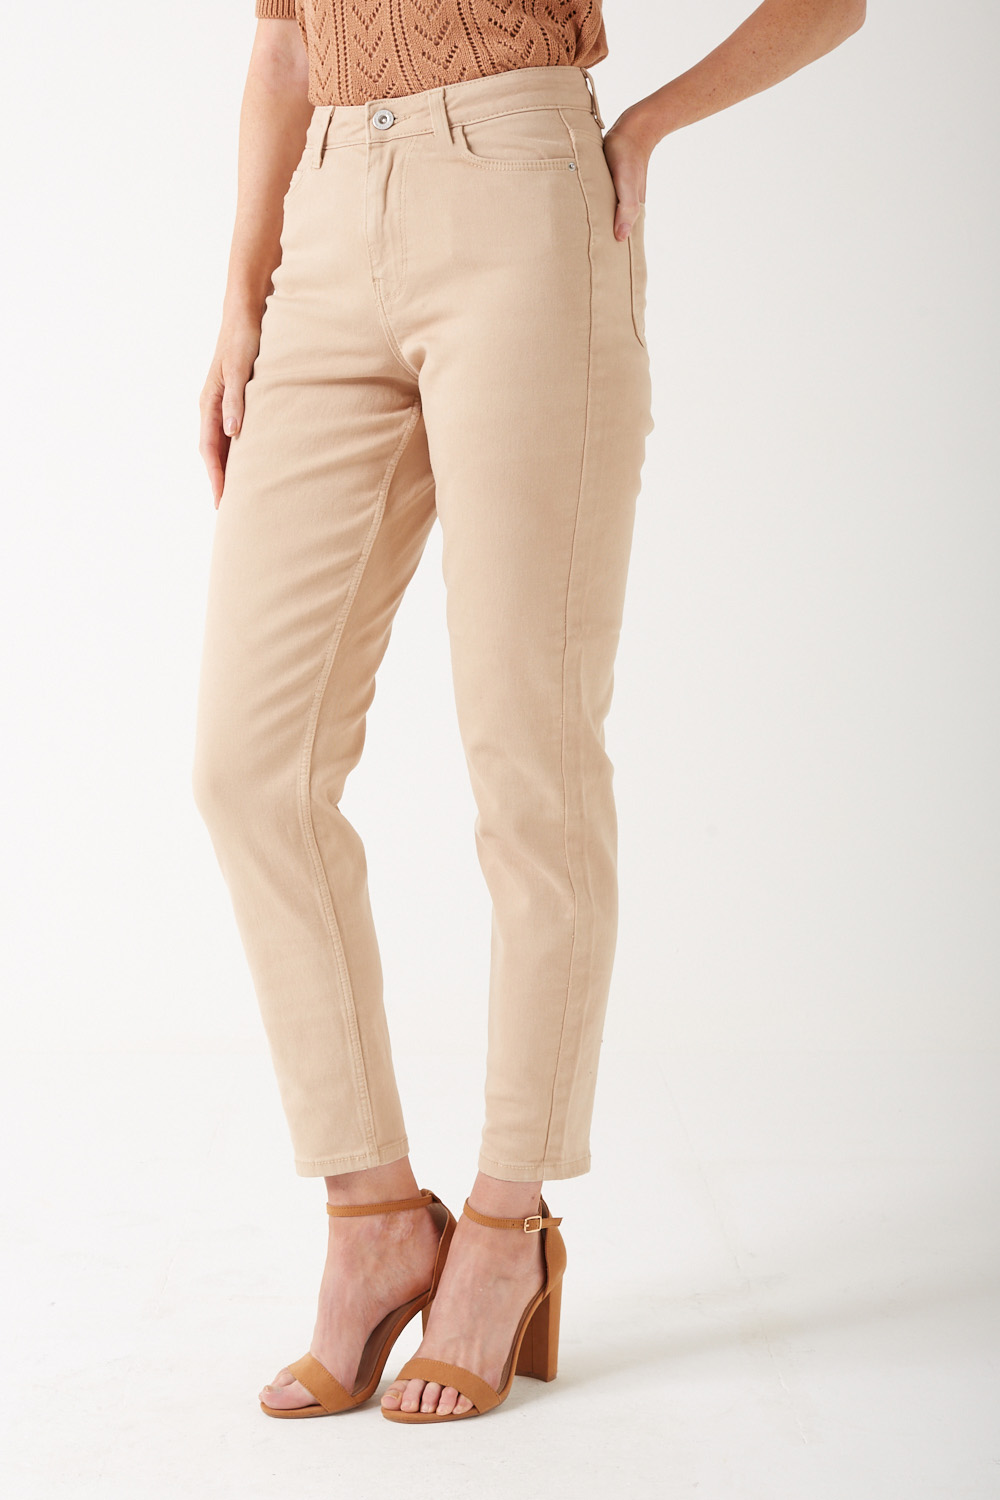 Pieces Kesia Rise Mom Jeans in Beige | iCLOTHING - iCLOTHING